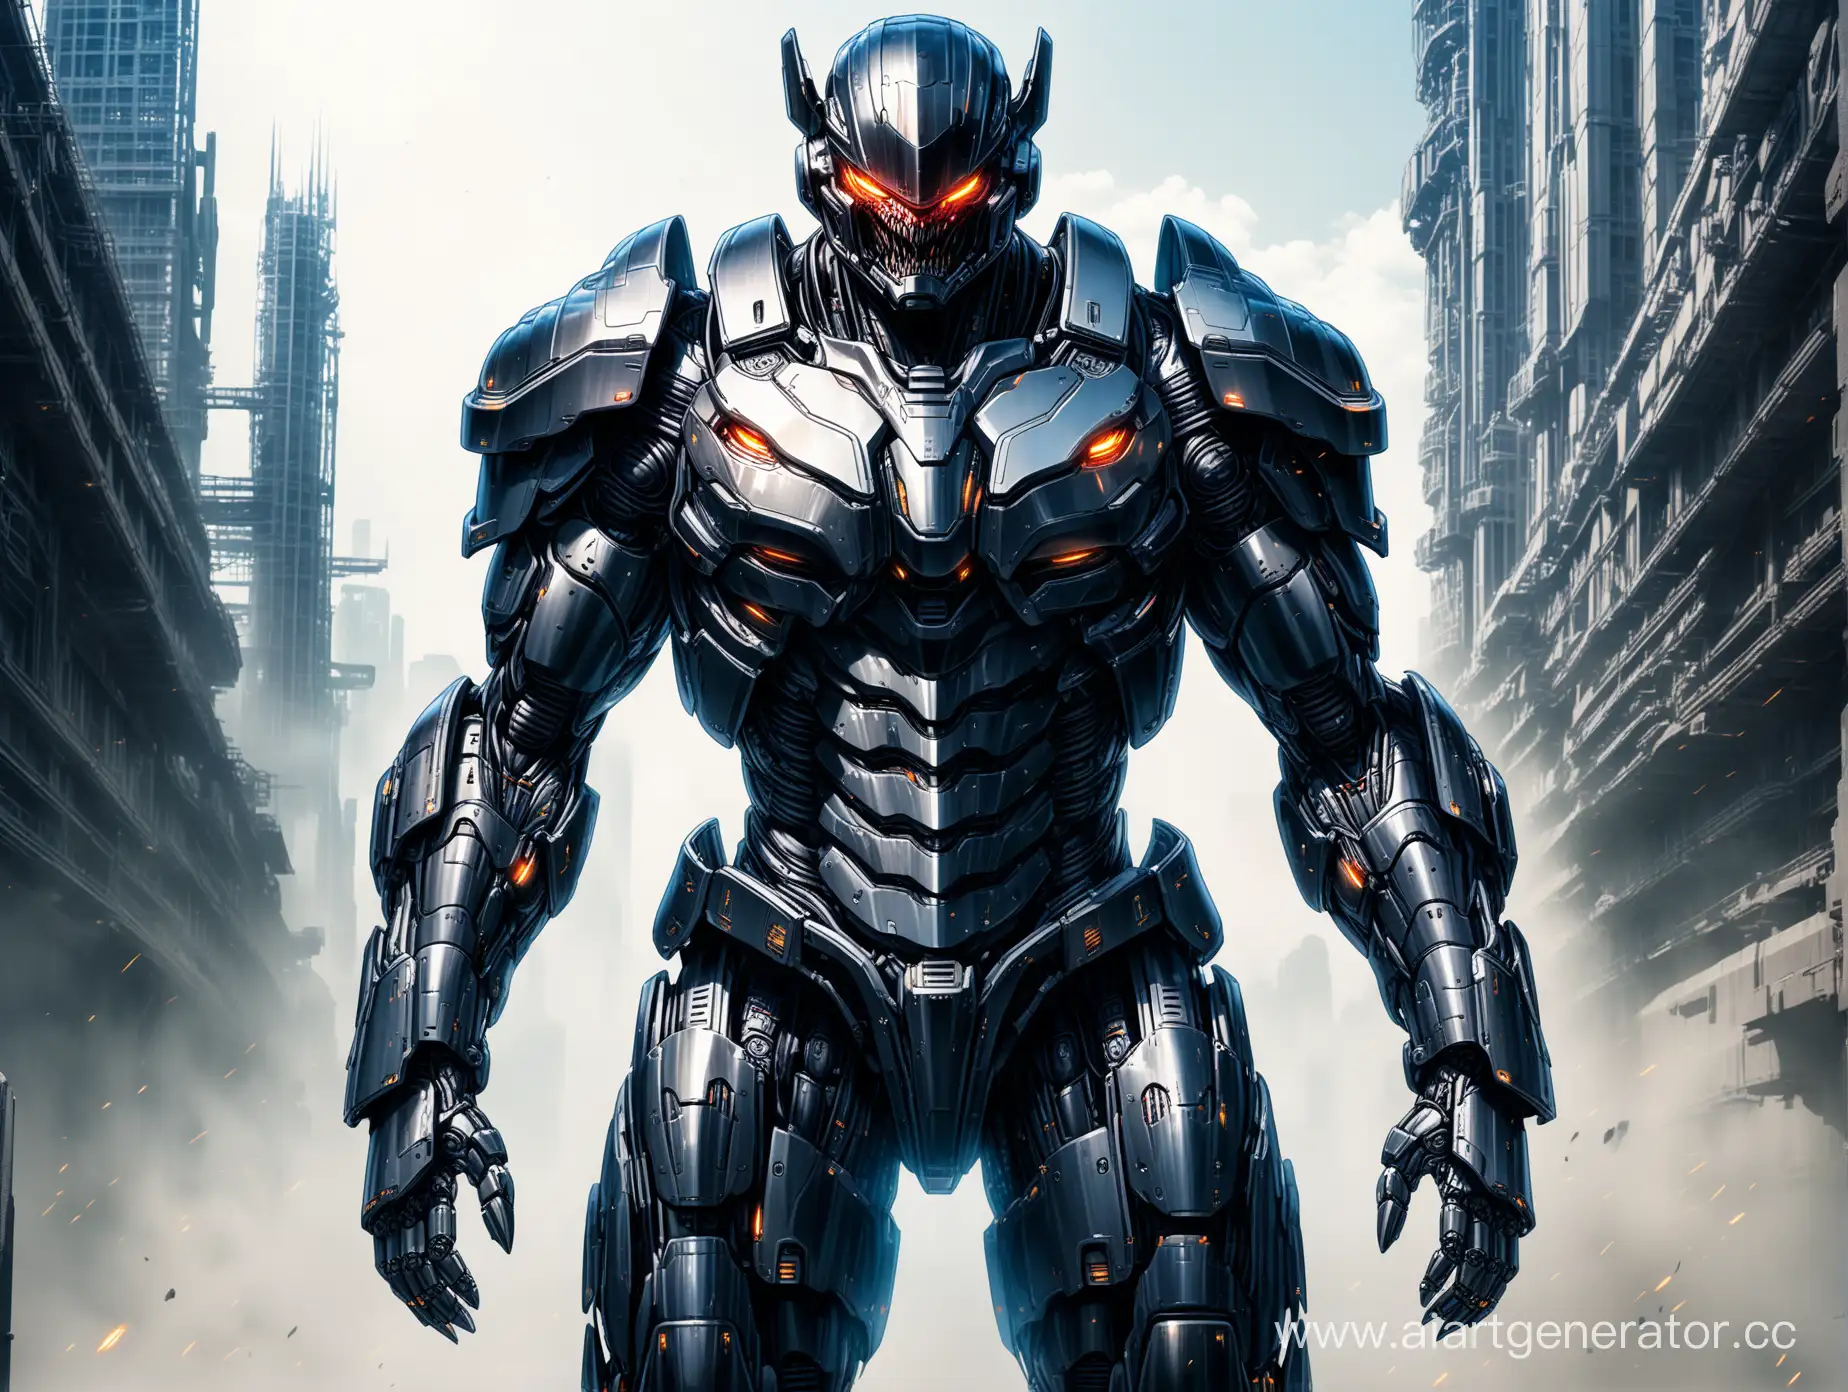 Powerful-Robocop-in-Futuristic-Armor-with-Advanced-Weaponry